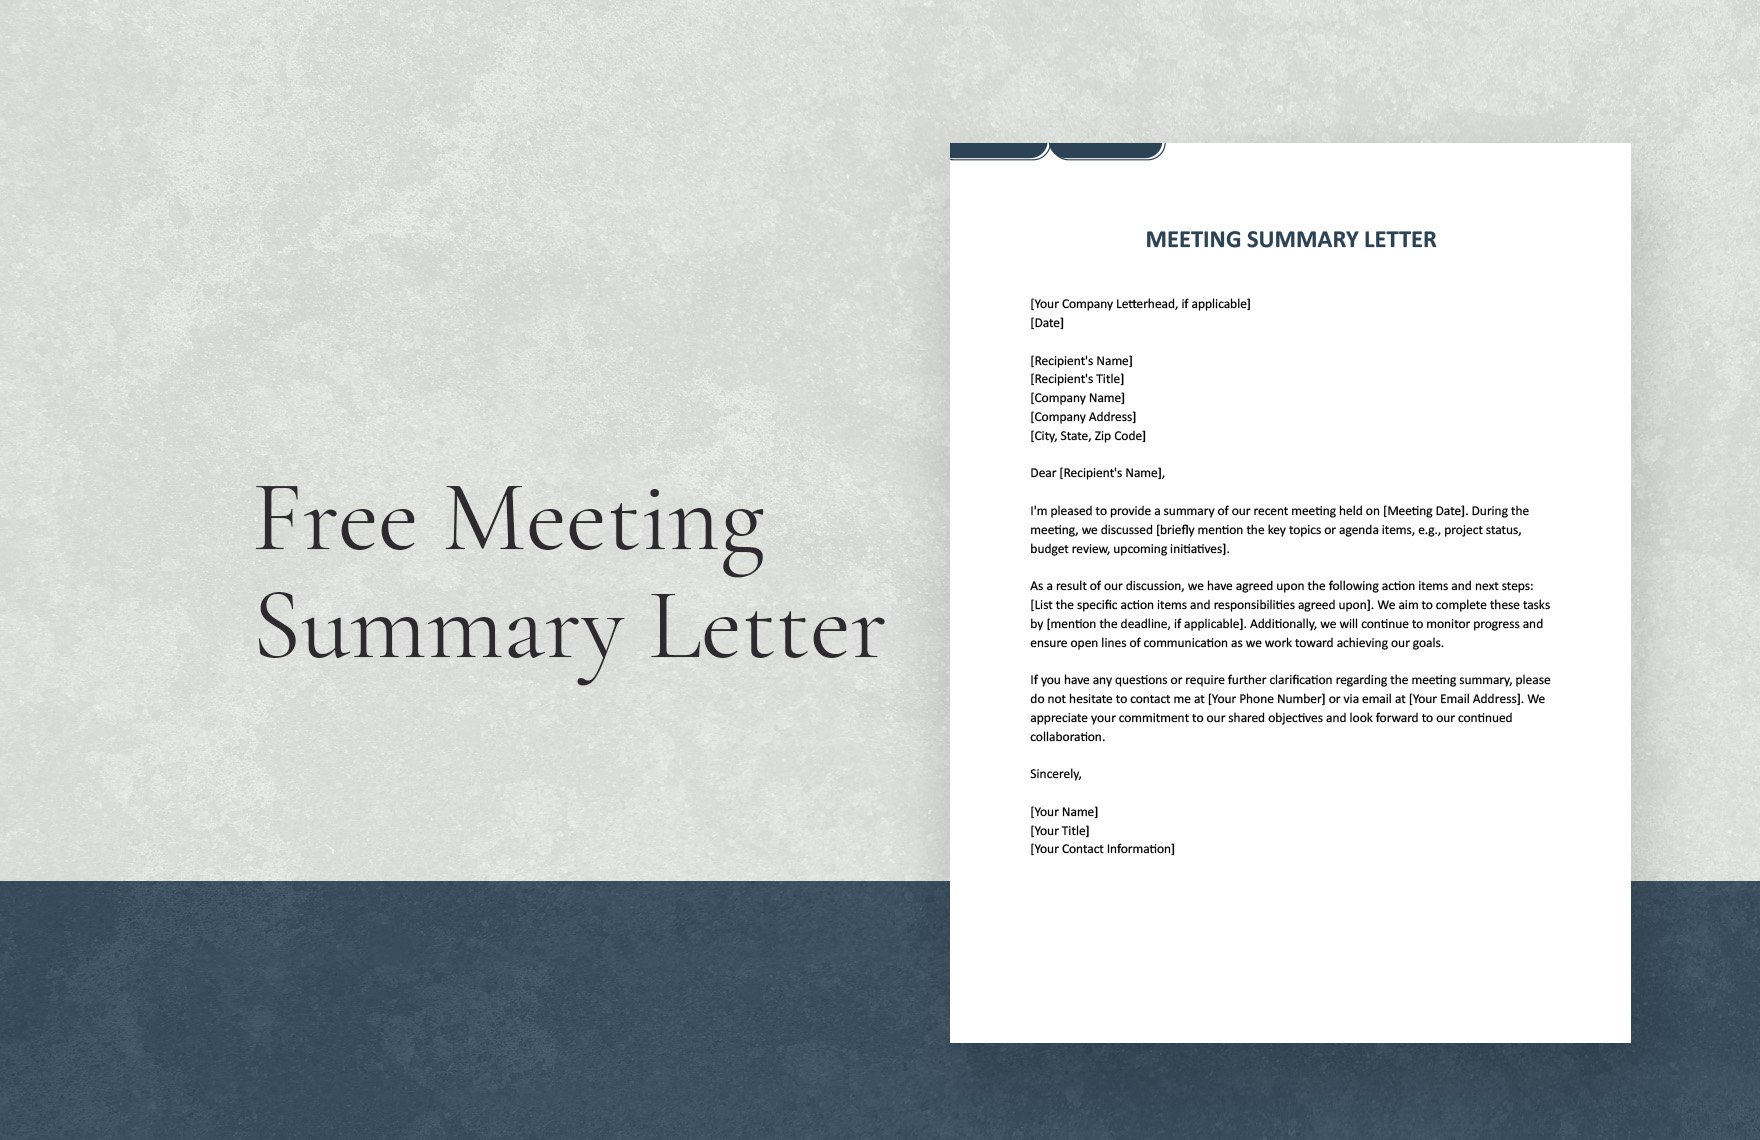 Free Meeting Summary Letter